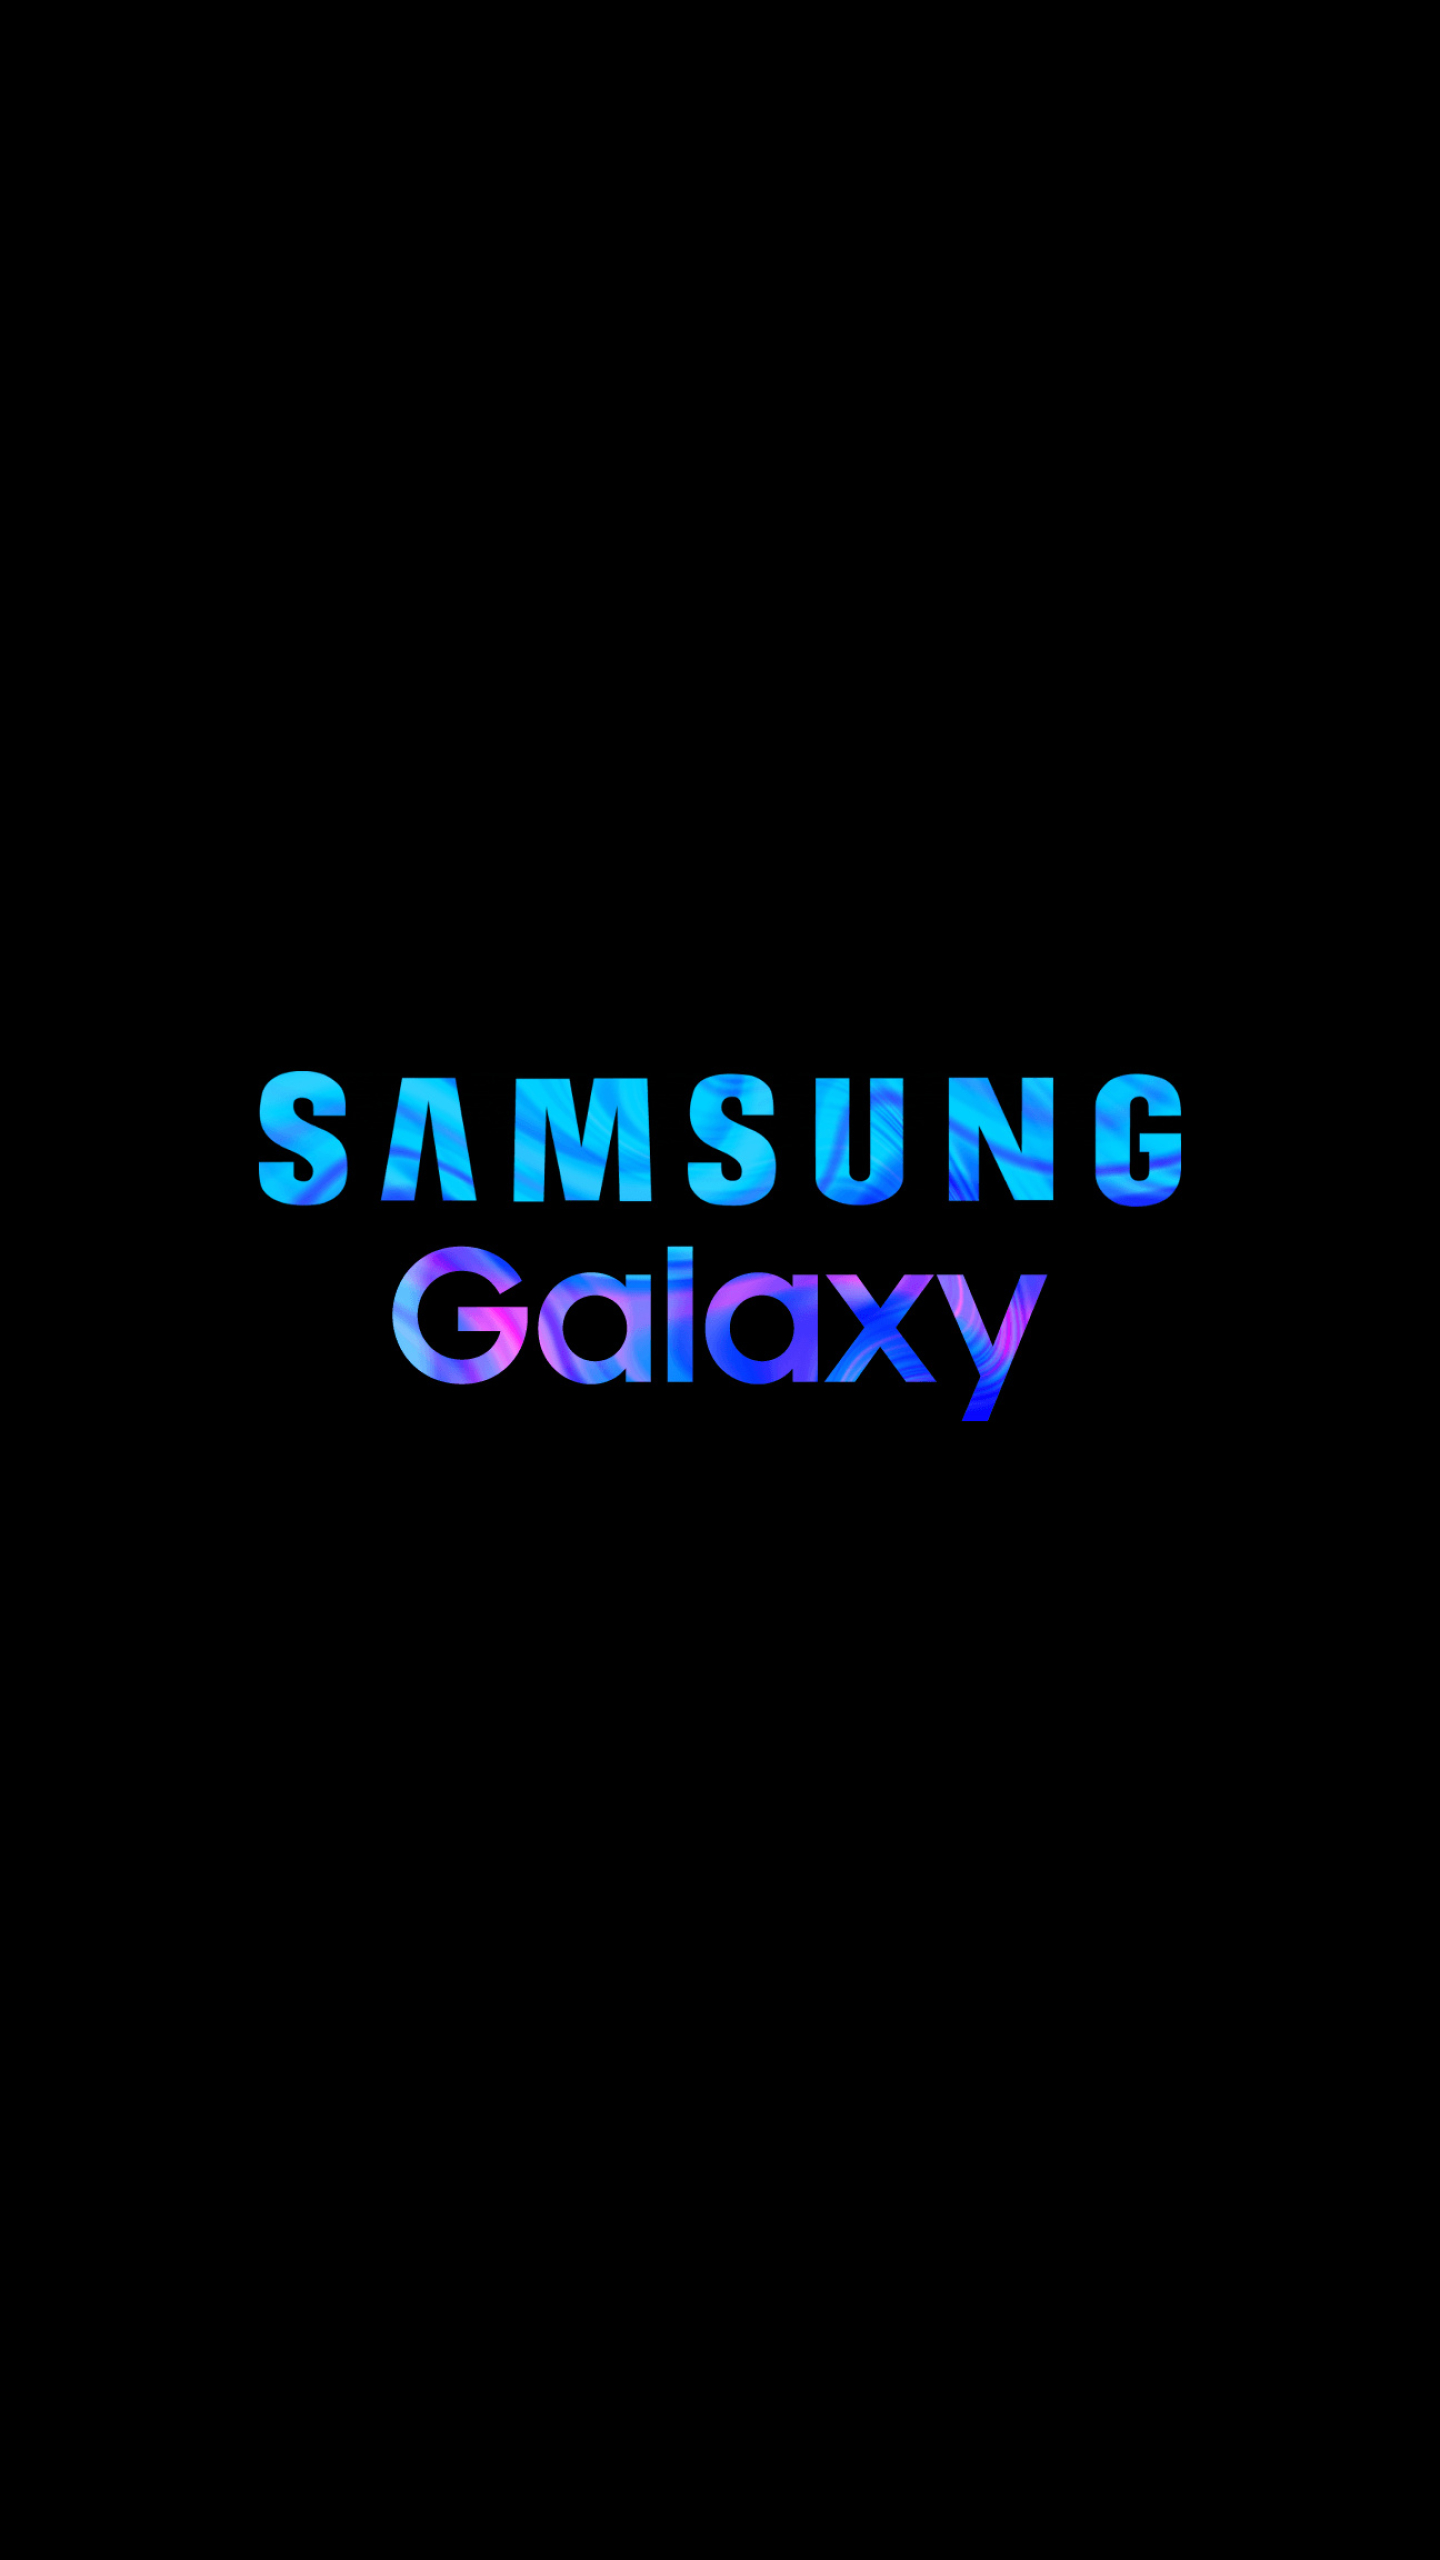 Samsung: Android smartphones, Galaxy devices, Innovative models, with performance at the forefront of its design. 1440x2560 HD Wallpaper.